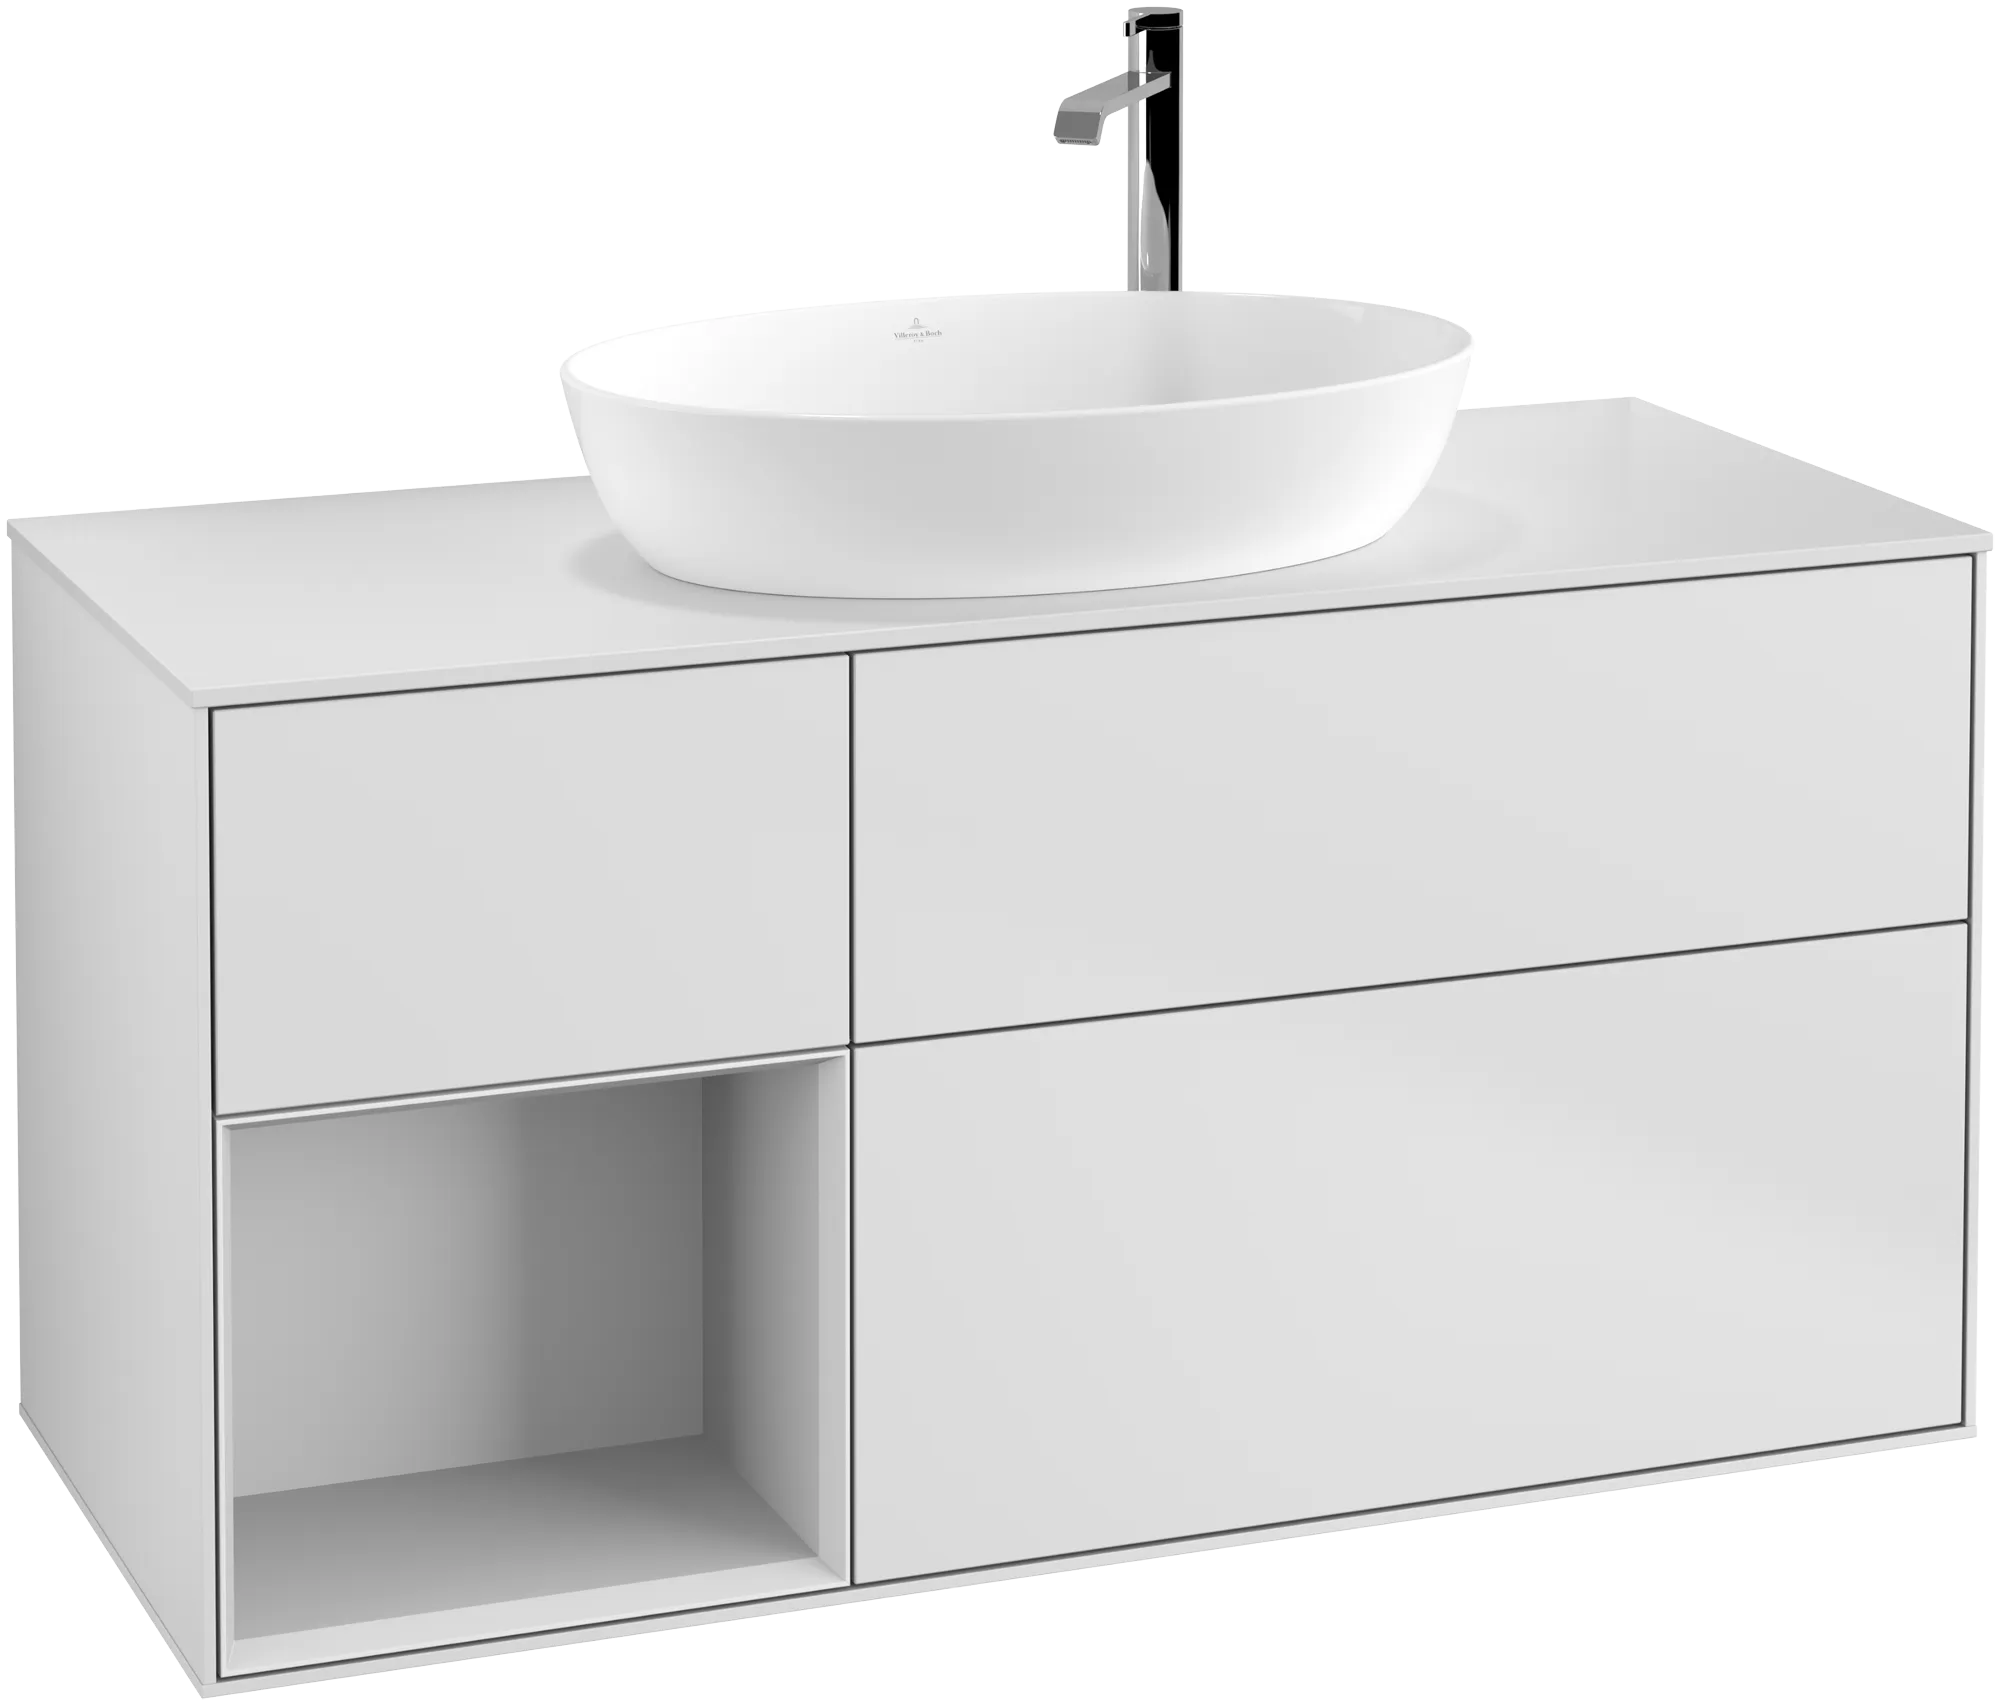 Obrázek VILLEROY BOCH Finion Vanity unit, with lighting, 3 pull-out compartments, 1200 x 603 x 501 mm, White Matt Lacquer / White Matt Lacquer / Glass White Matt #G941MTMT